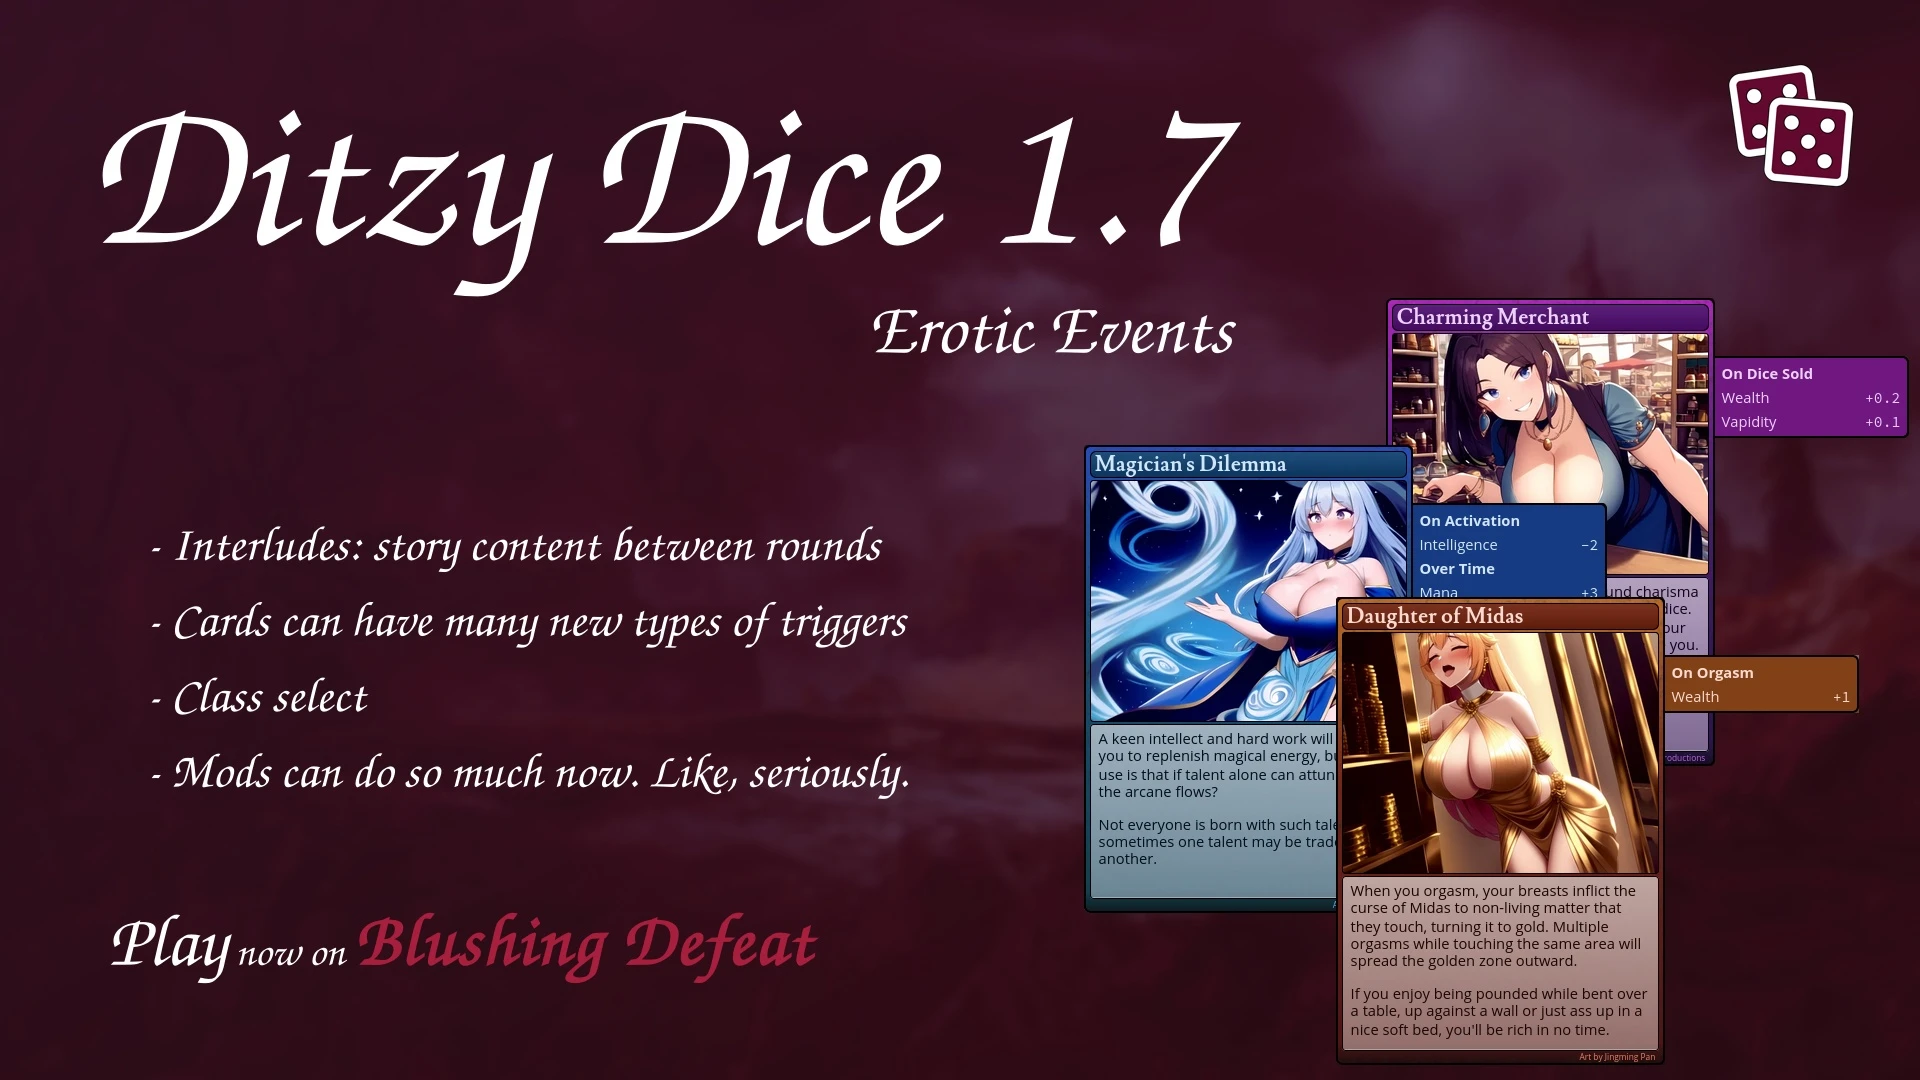 Ditzy Dice: Ever made a deal with the devil?